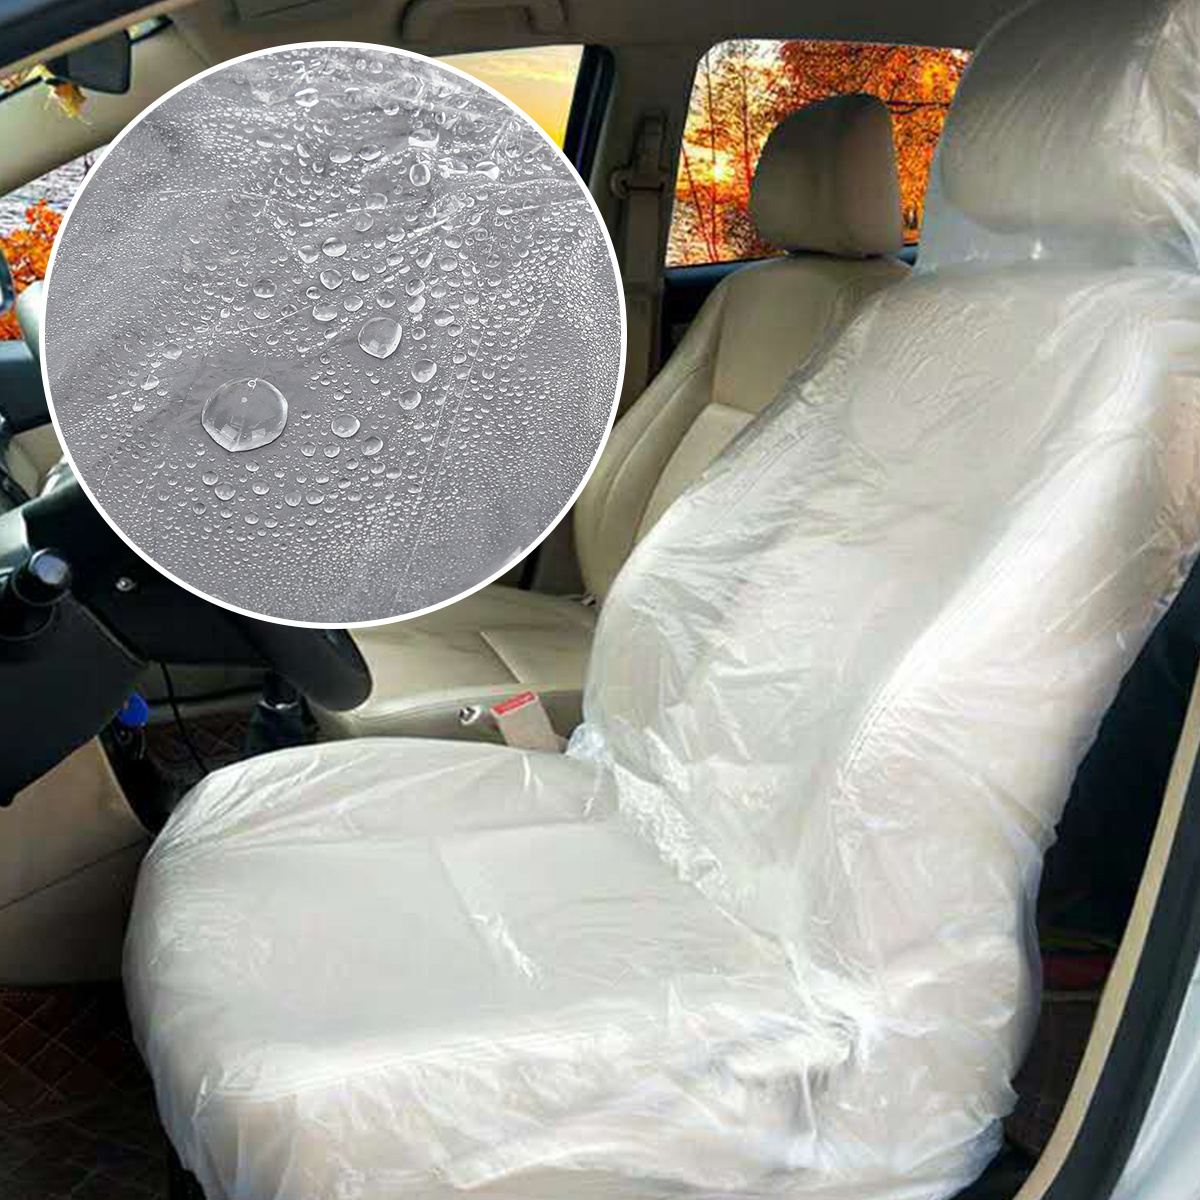 Universal Car Seat Cover Mat Washable Cushioned Chair 